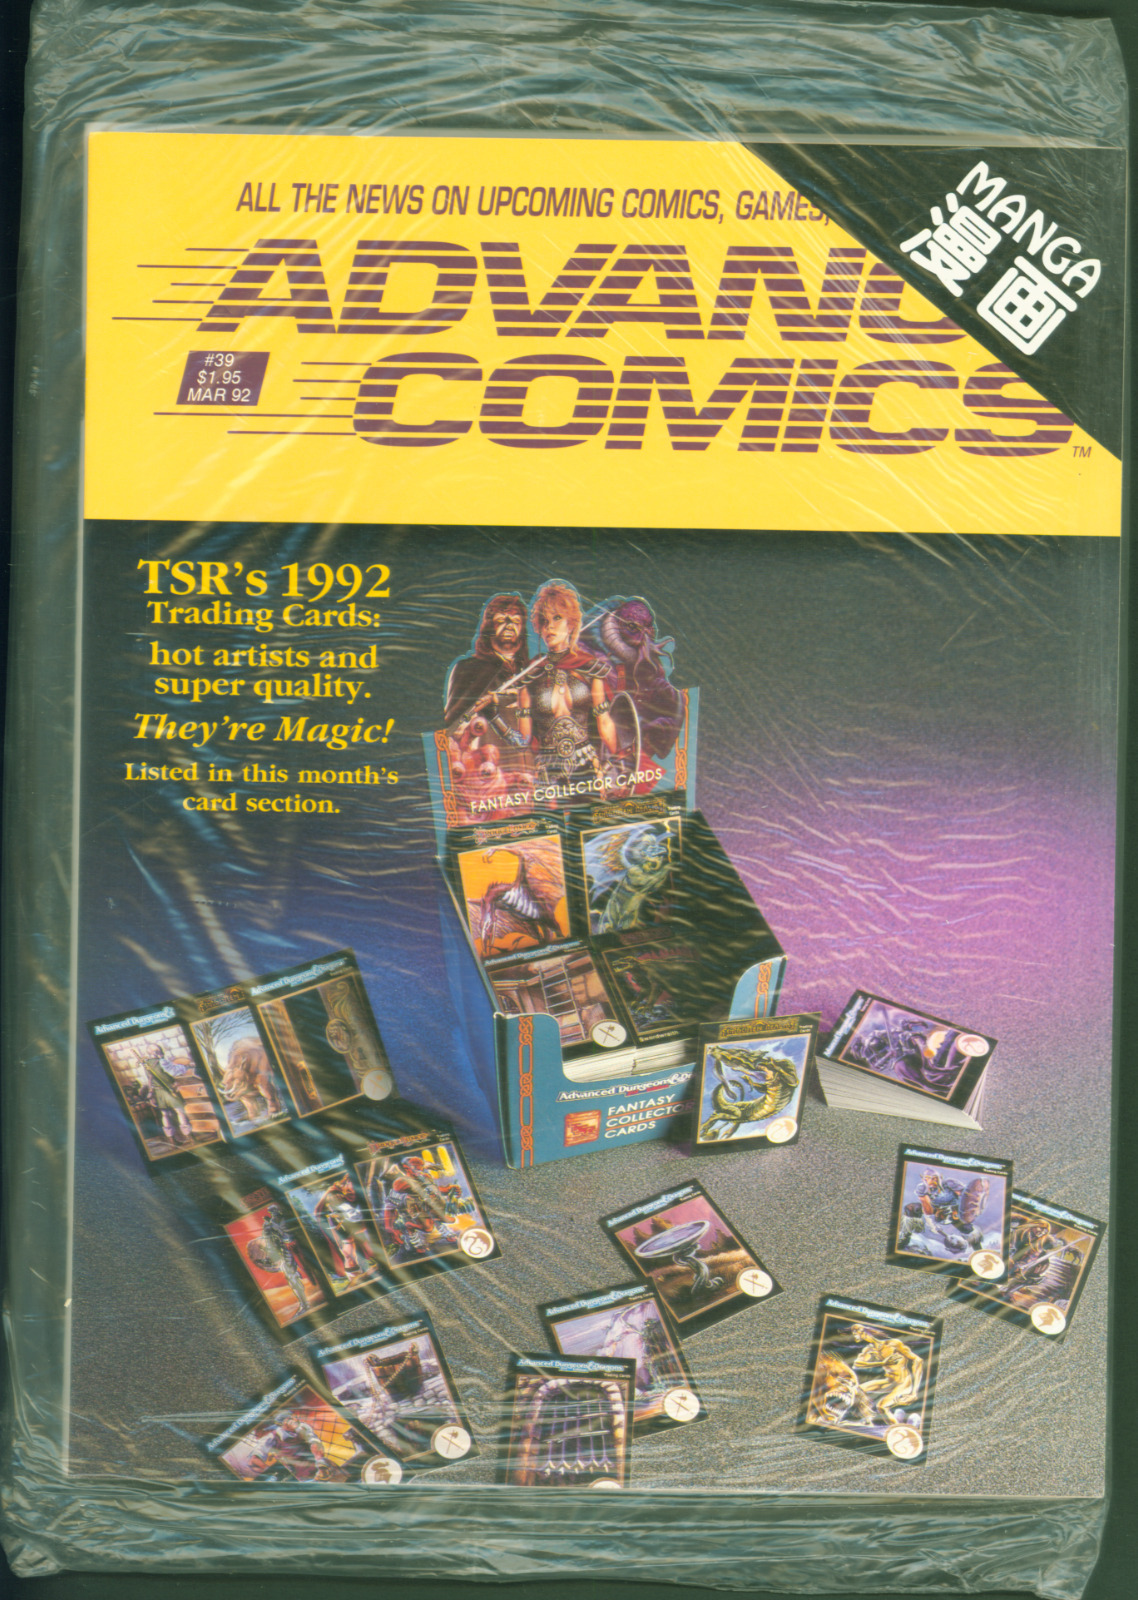 1992 Advance Comics #39 TSR Dungeons & Dragons Trading Cards Cover Sealed New